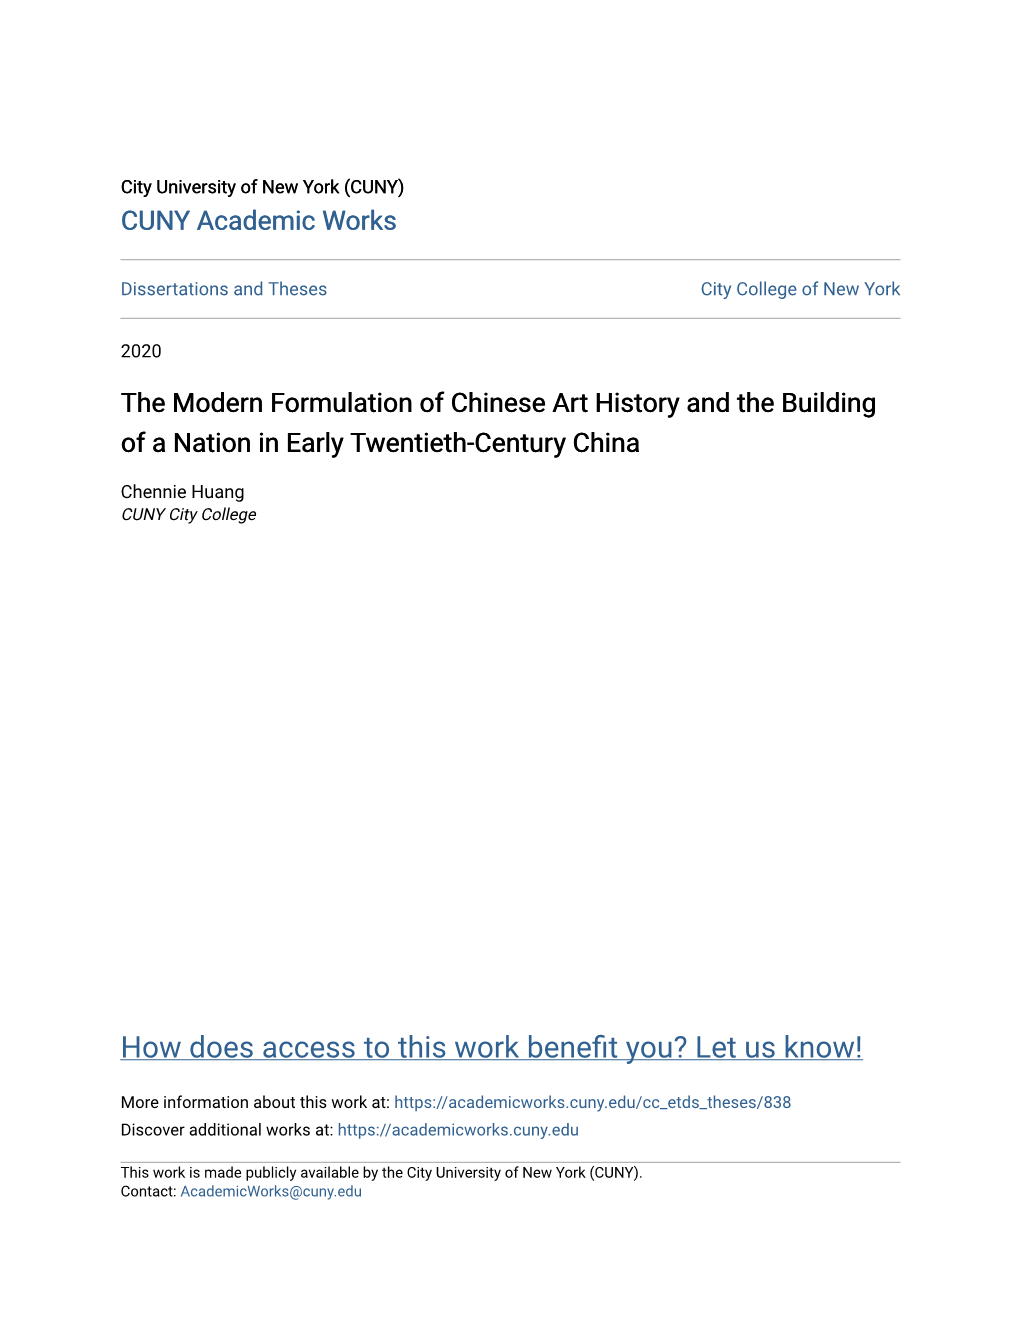 The Modern Formulation of Chinese Art History and the Building of a Nation in Early Twentieth-Century China